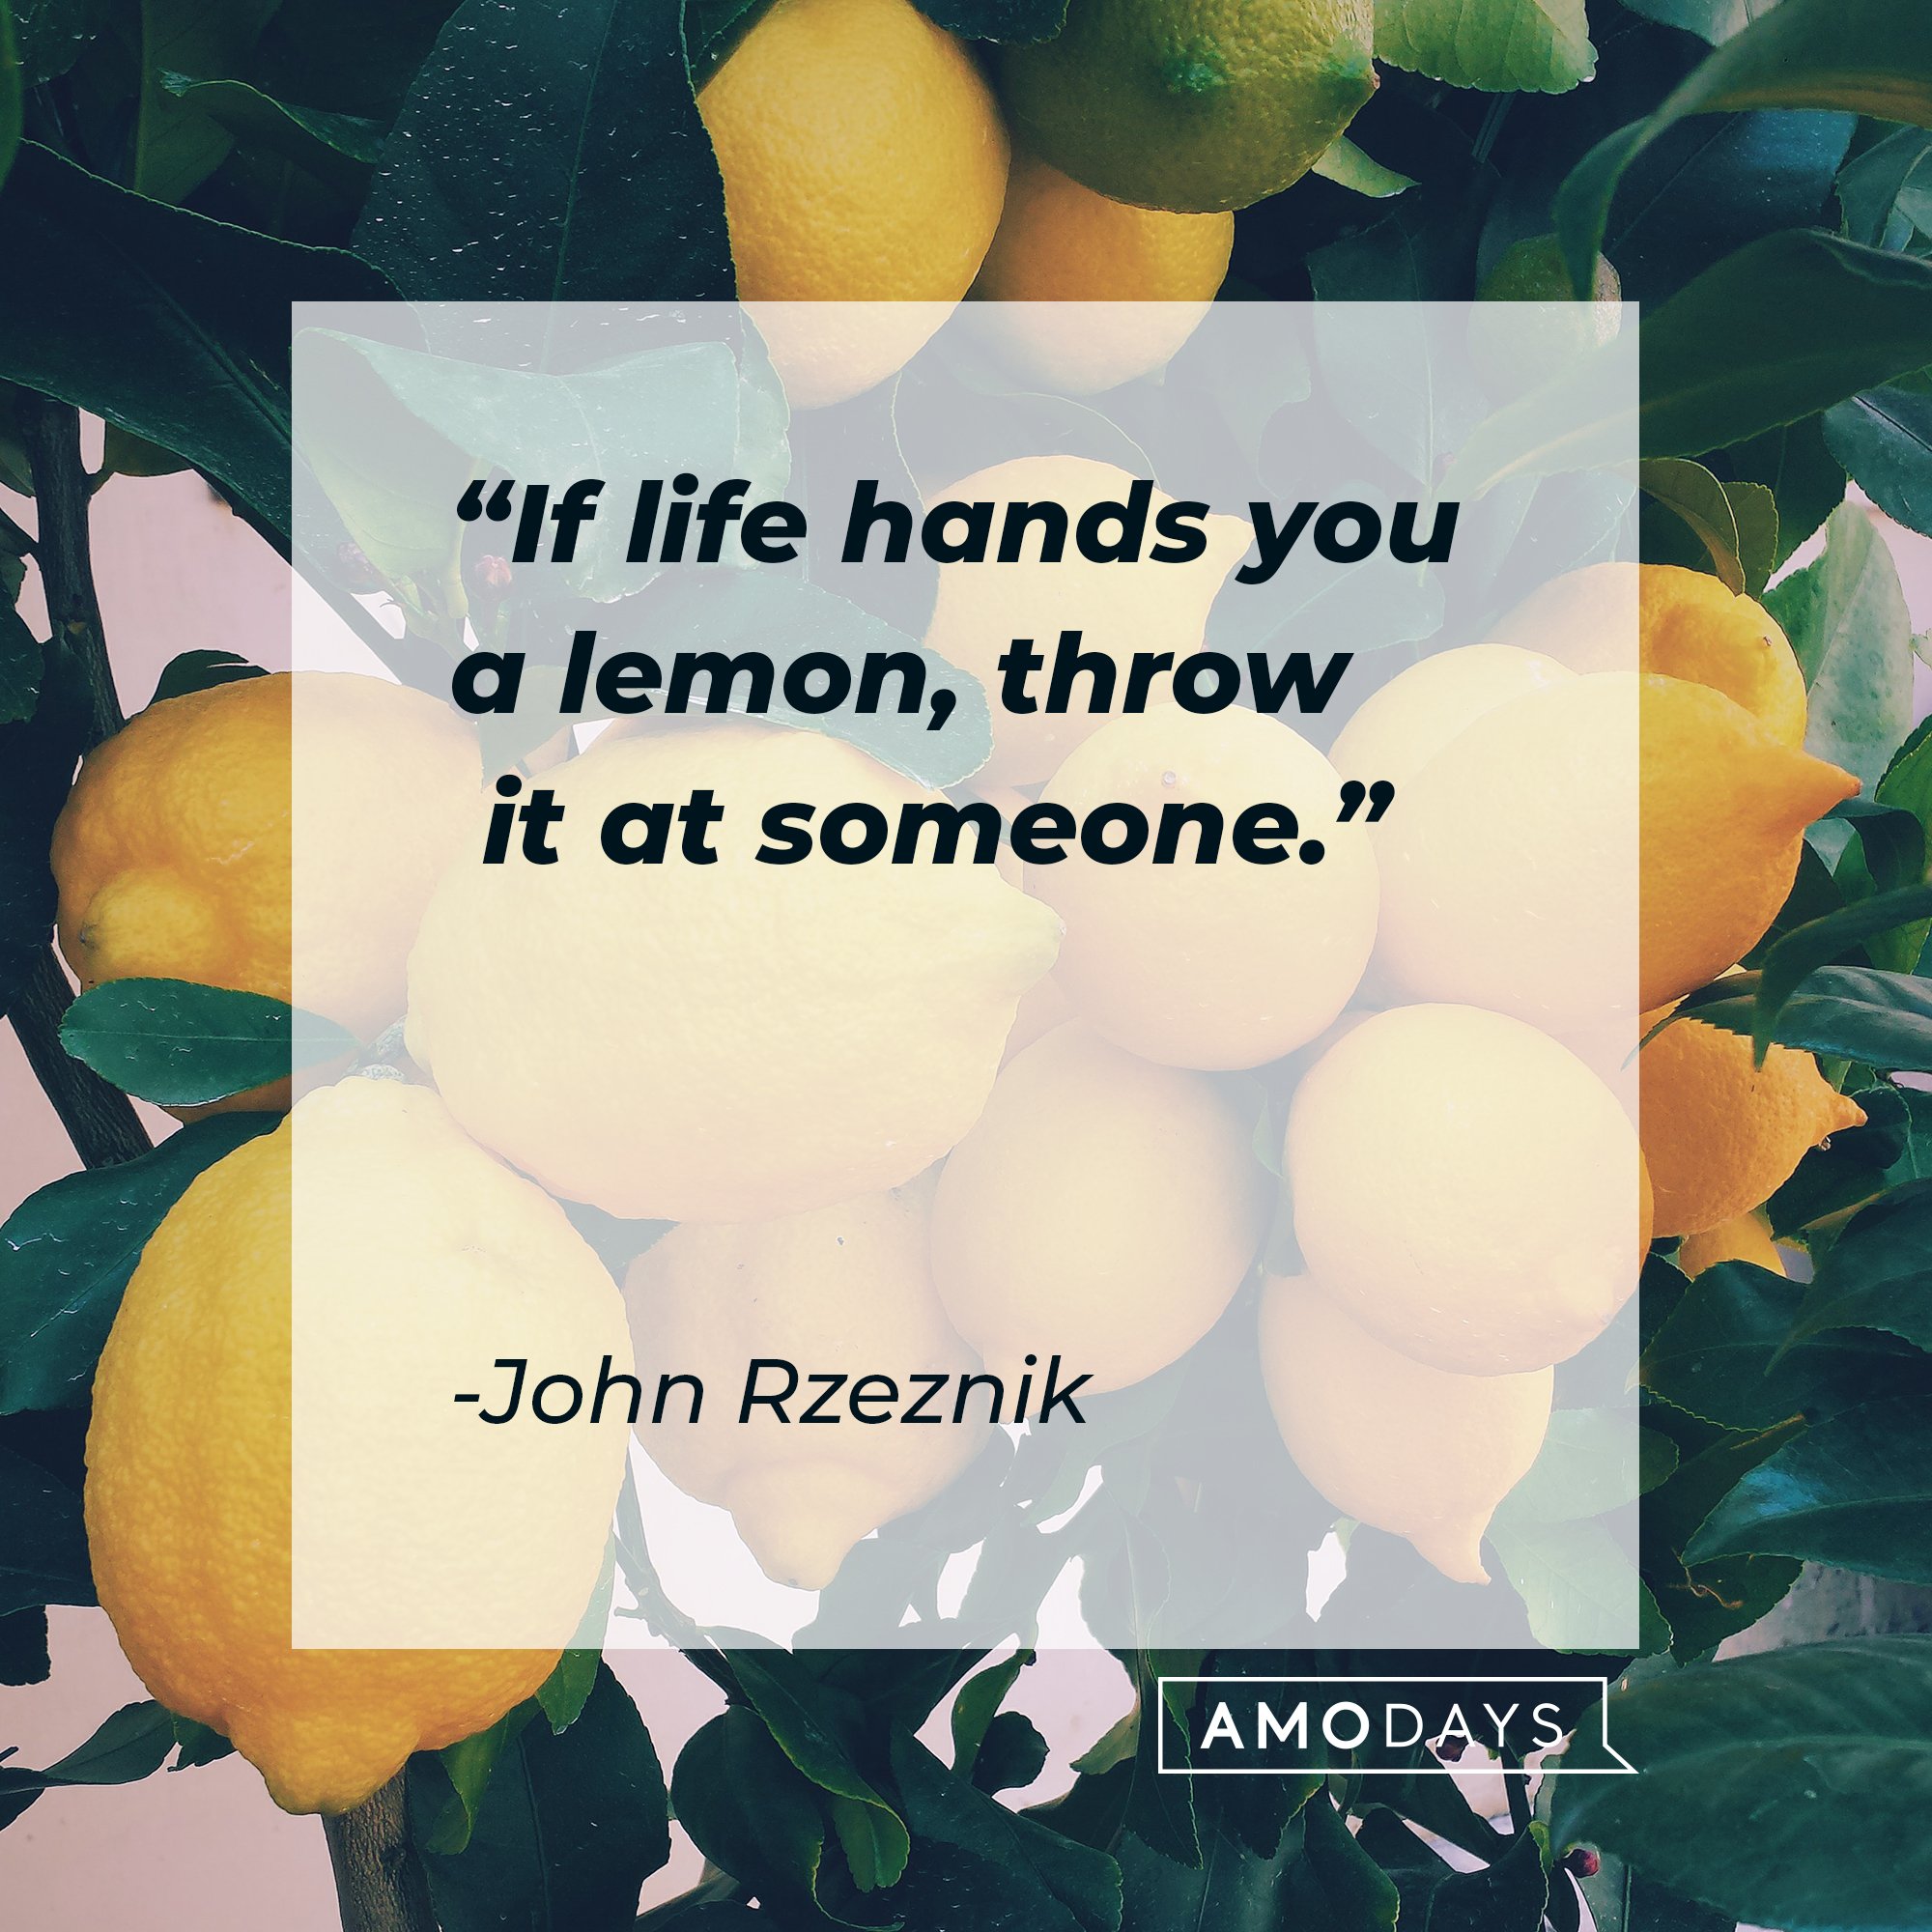 John Rzeznik’s quote: "If life hands you a lemon, throw it at someone." | Image: AmoDays 